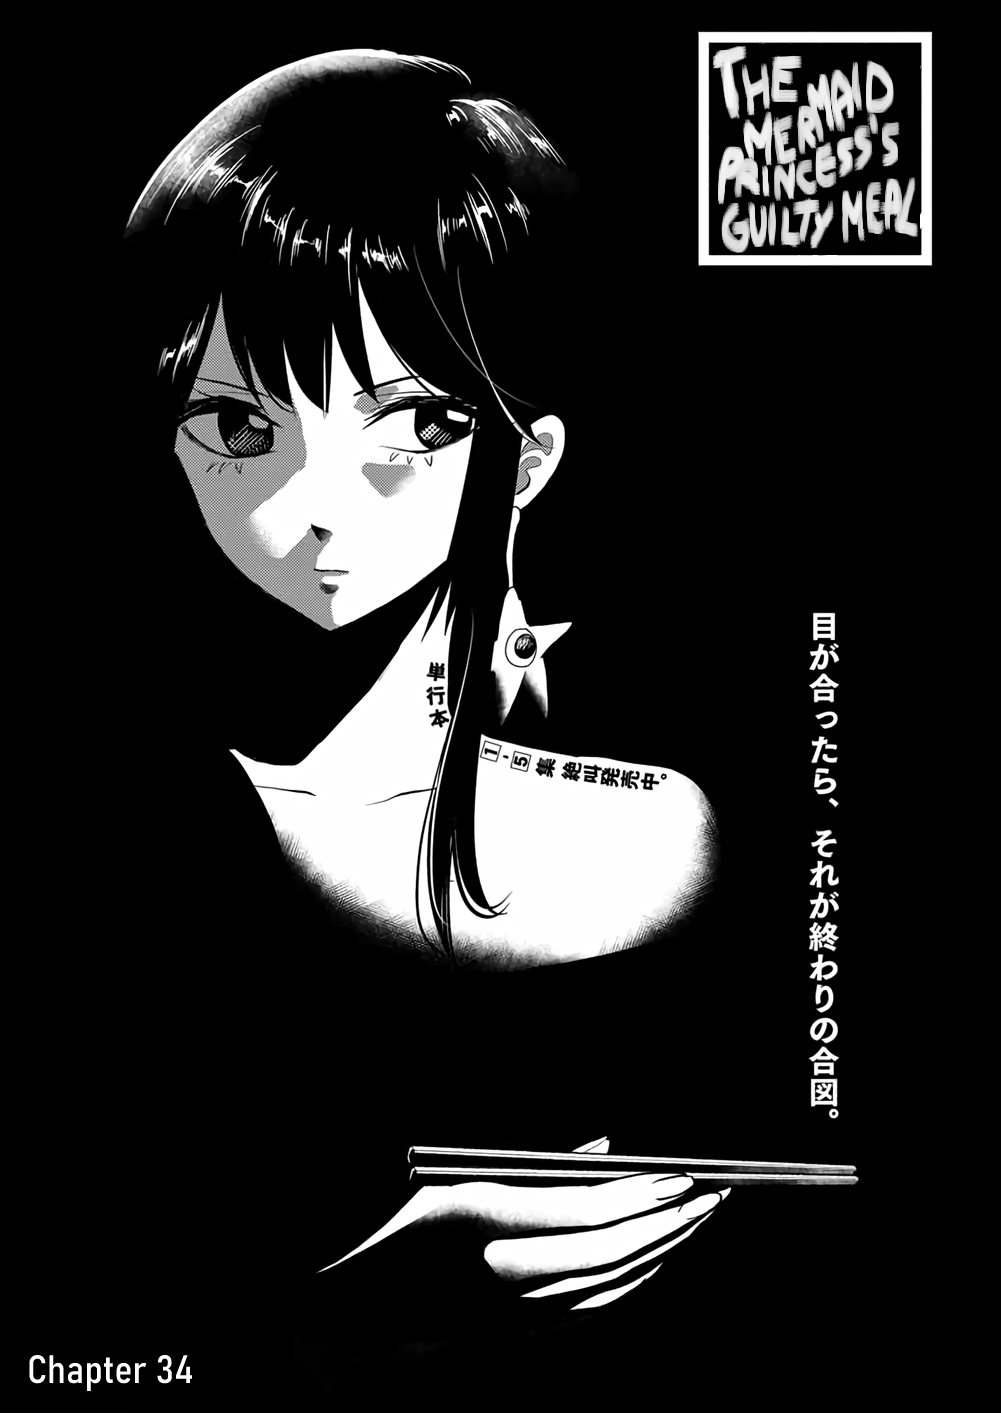 The Mermaid Princess's Guilty Meal Vol.6 Chapter 34 - Picture 1